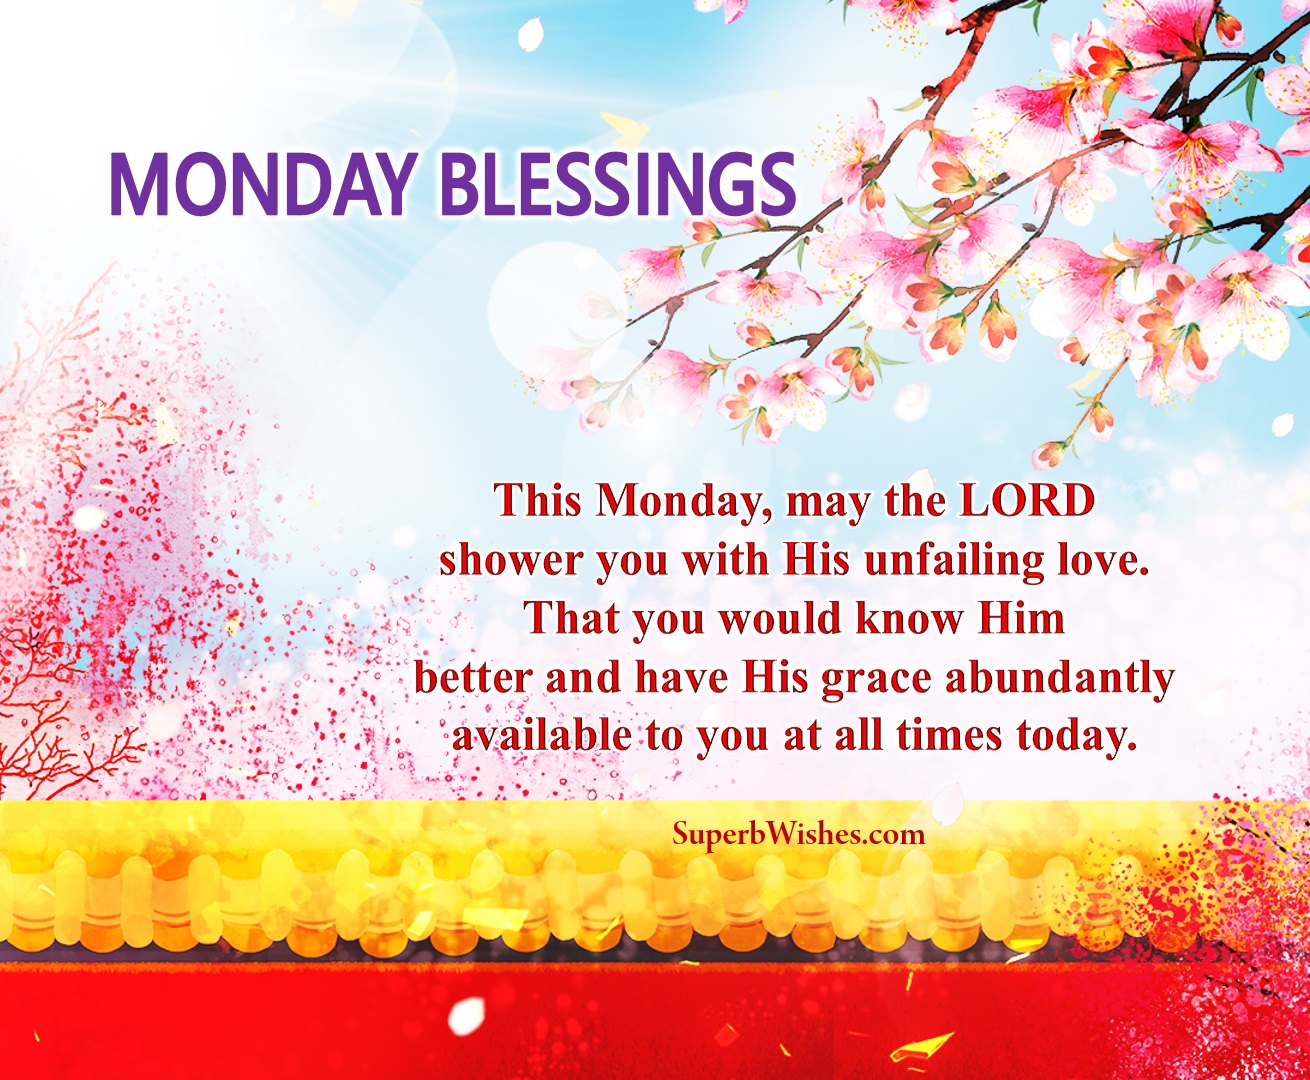 Monday blessings images quotes. Superbwishes.com